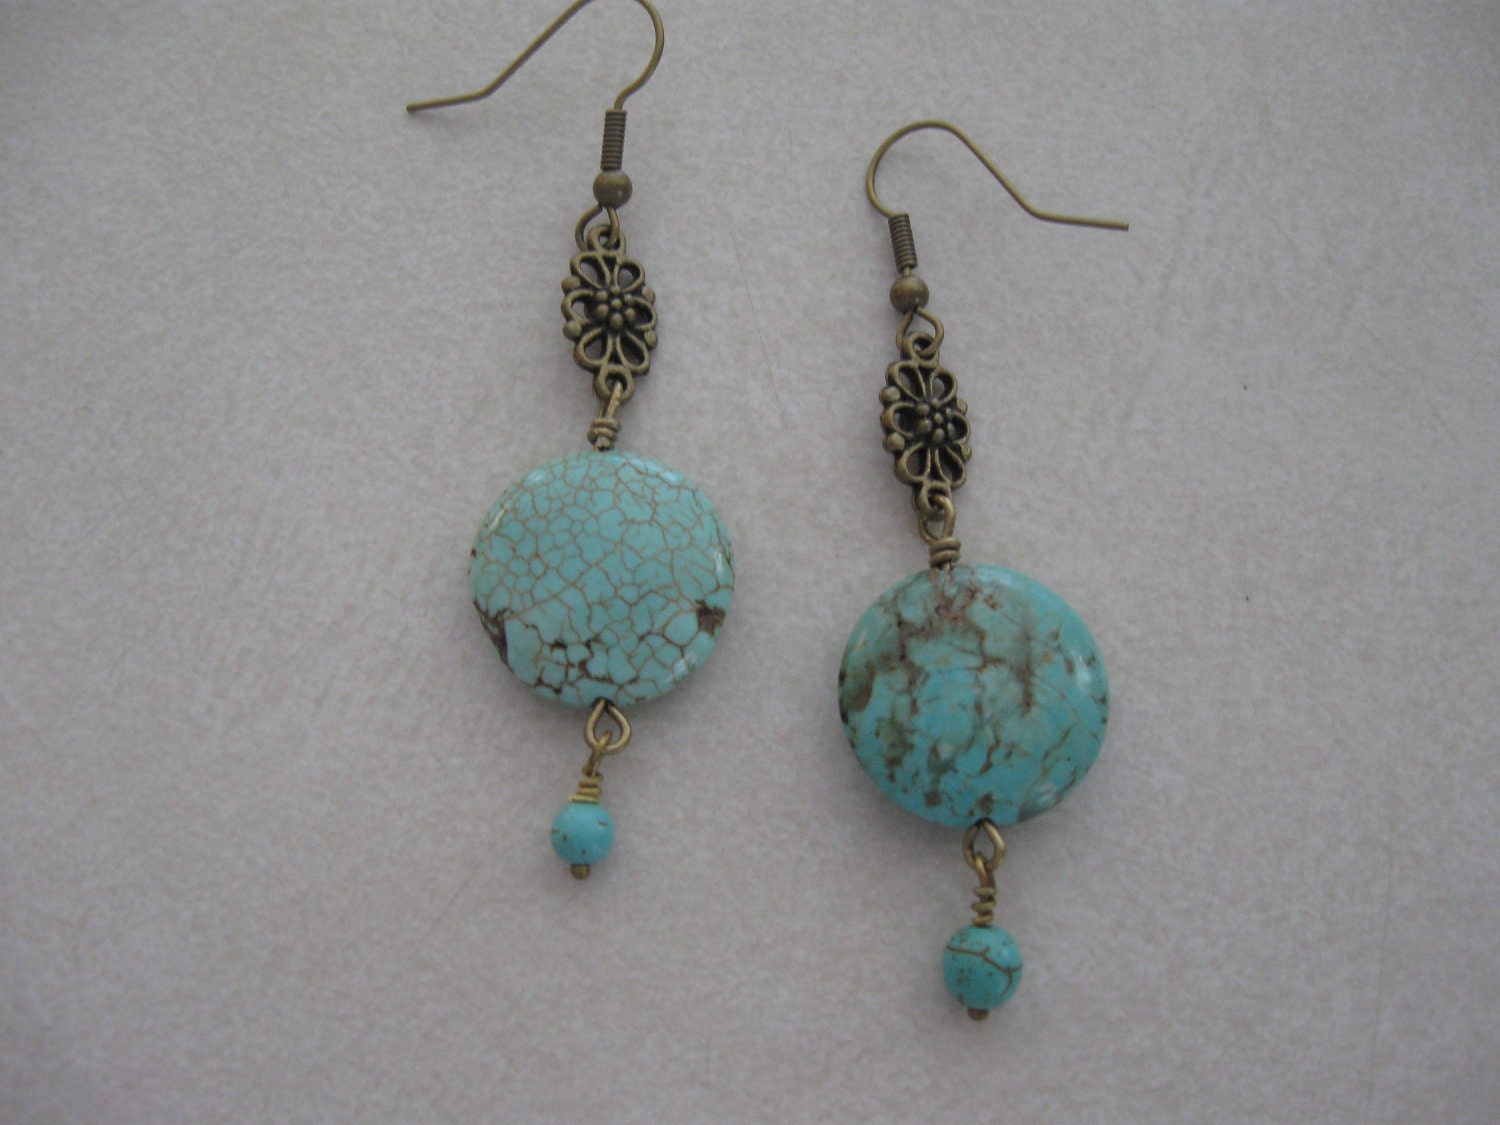 Turquoise Blue Magnesite earrings with bronze filigree